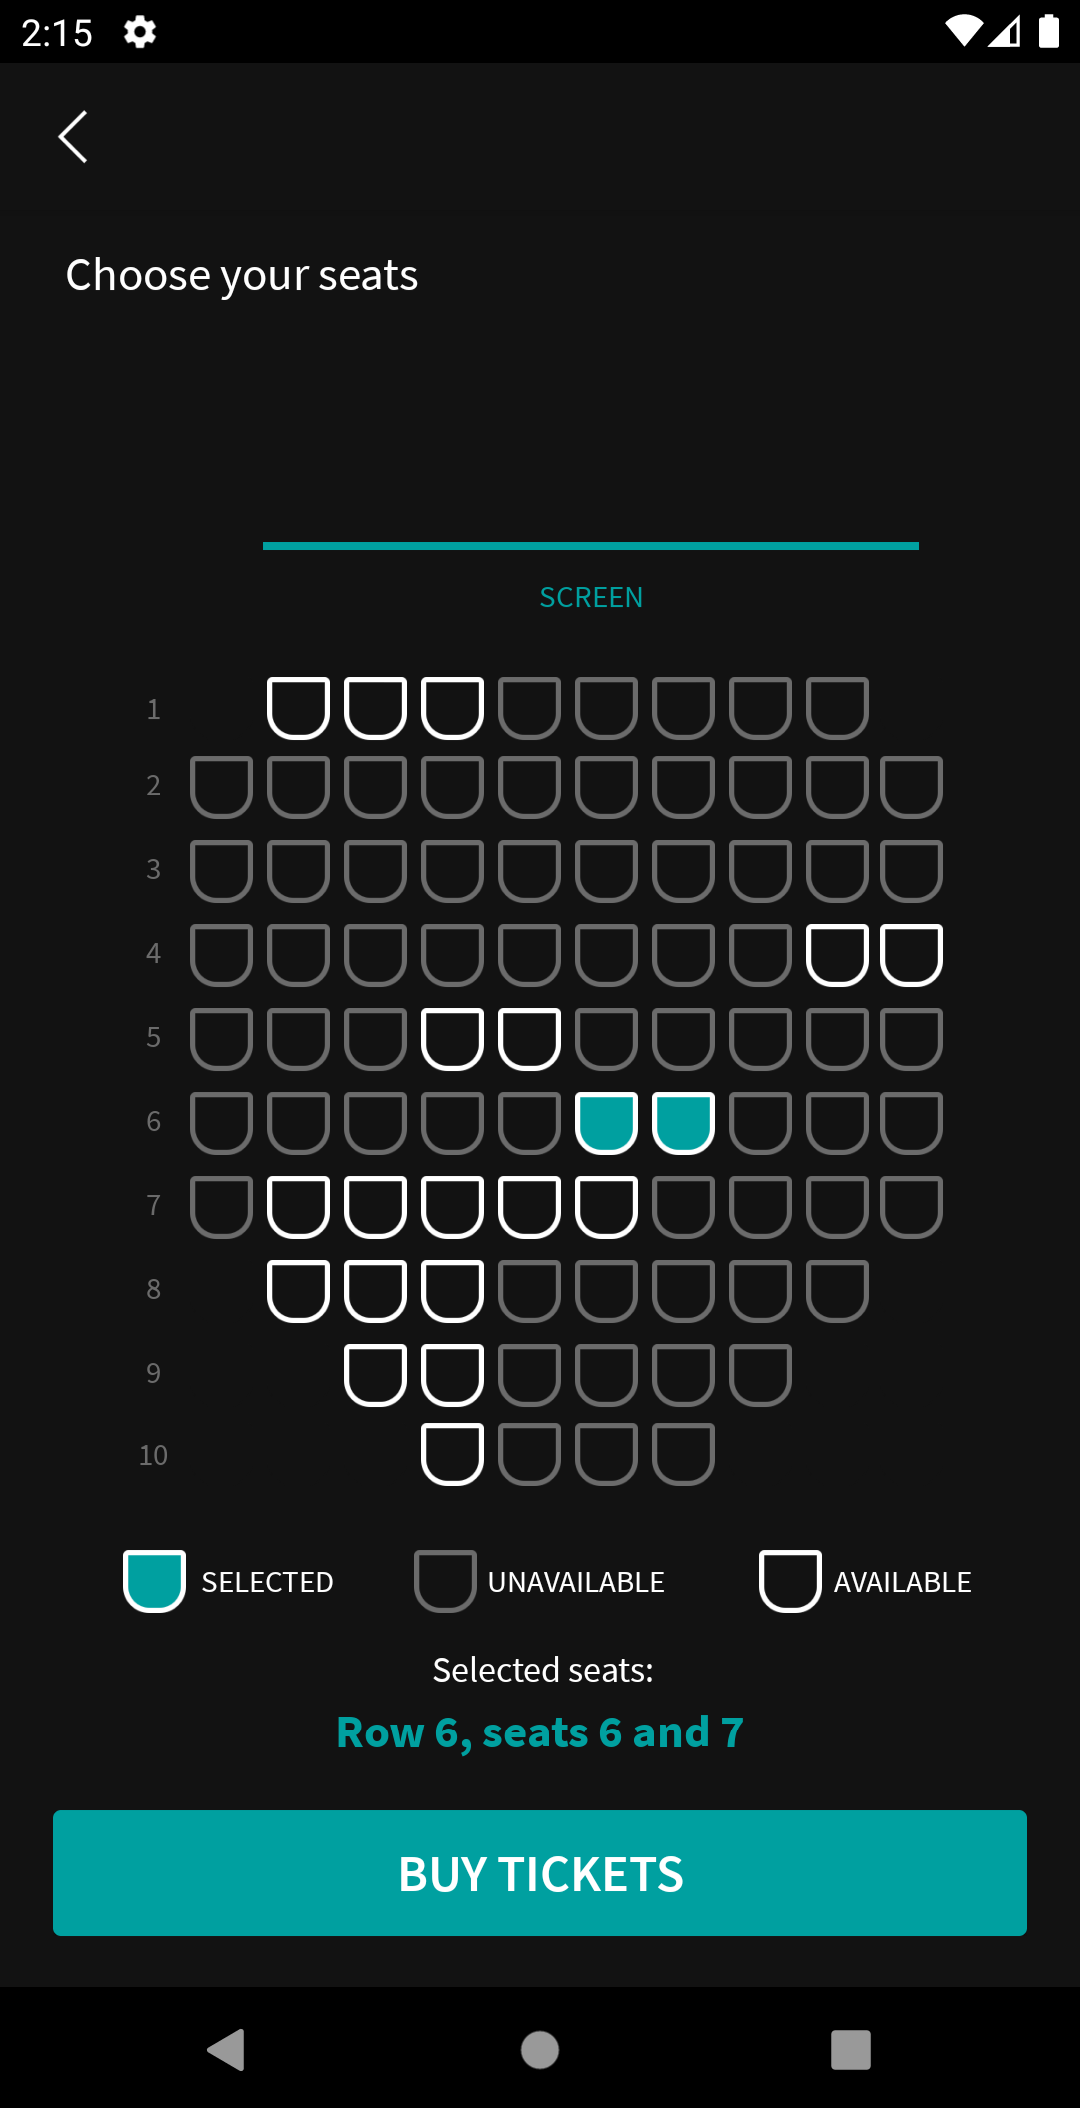 Movies-Android-ChooseSeat_20211025133031_1_png